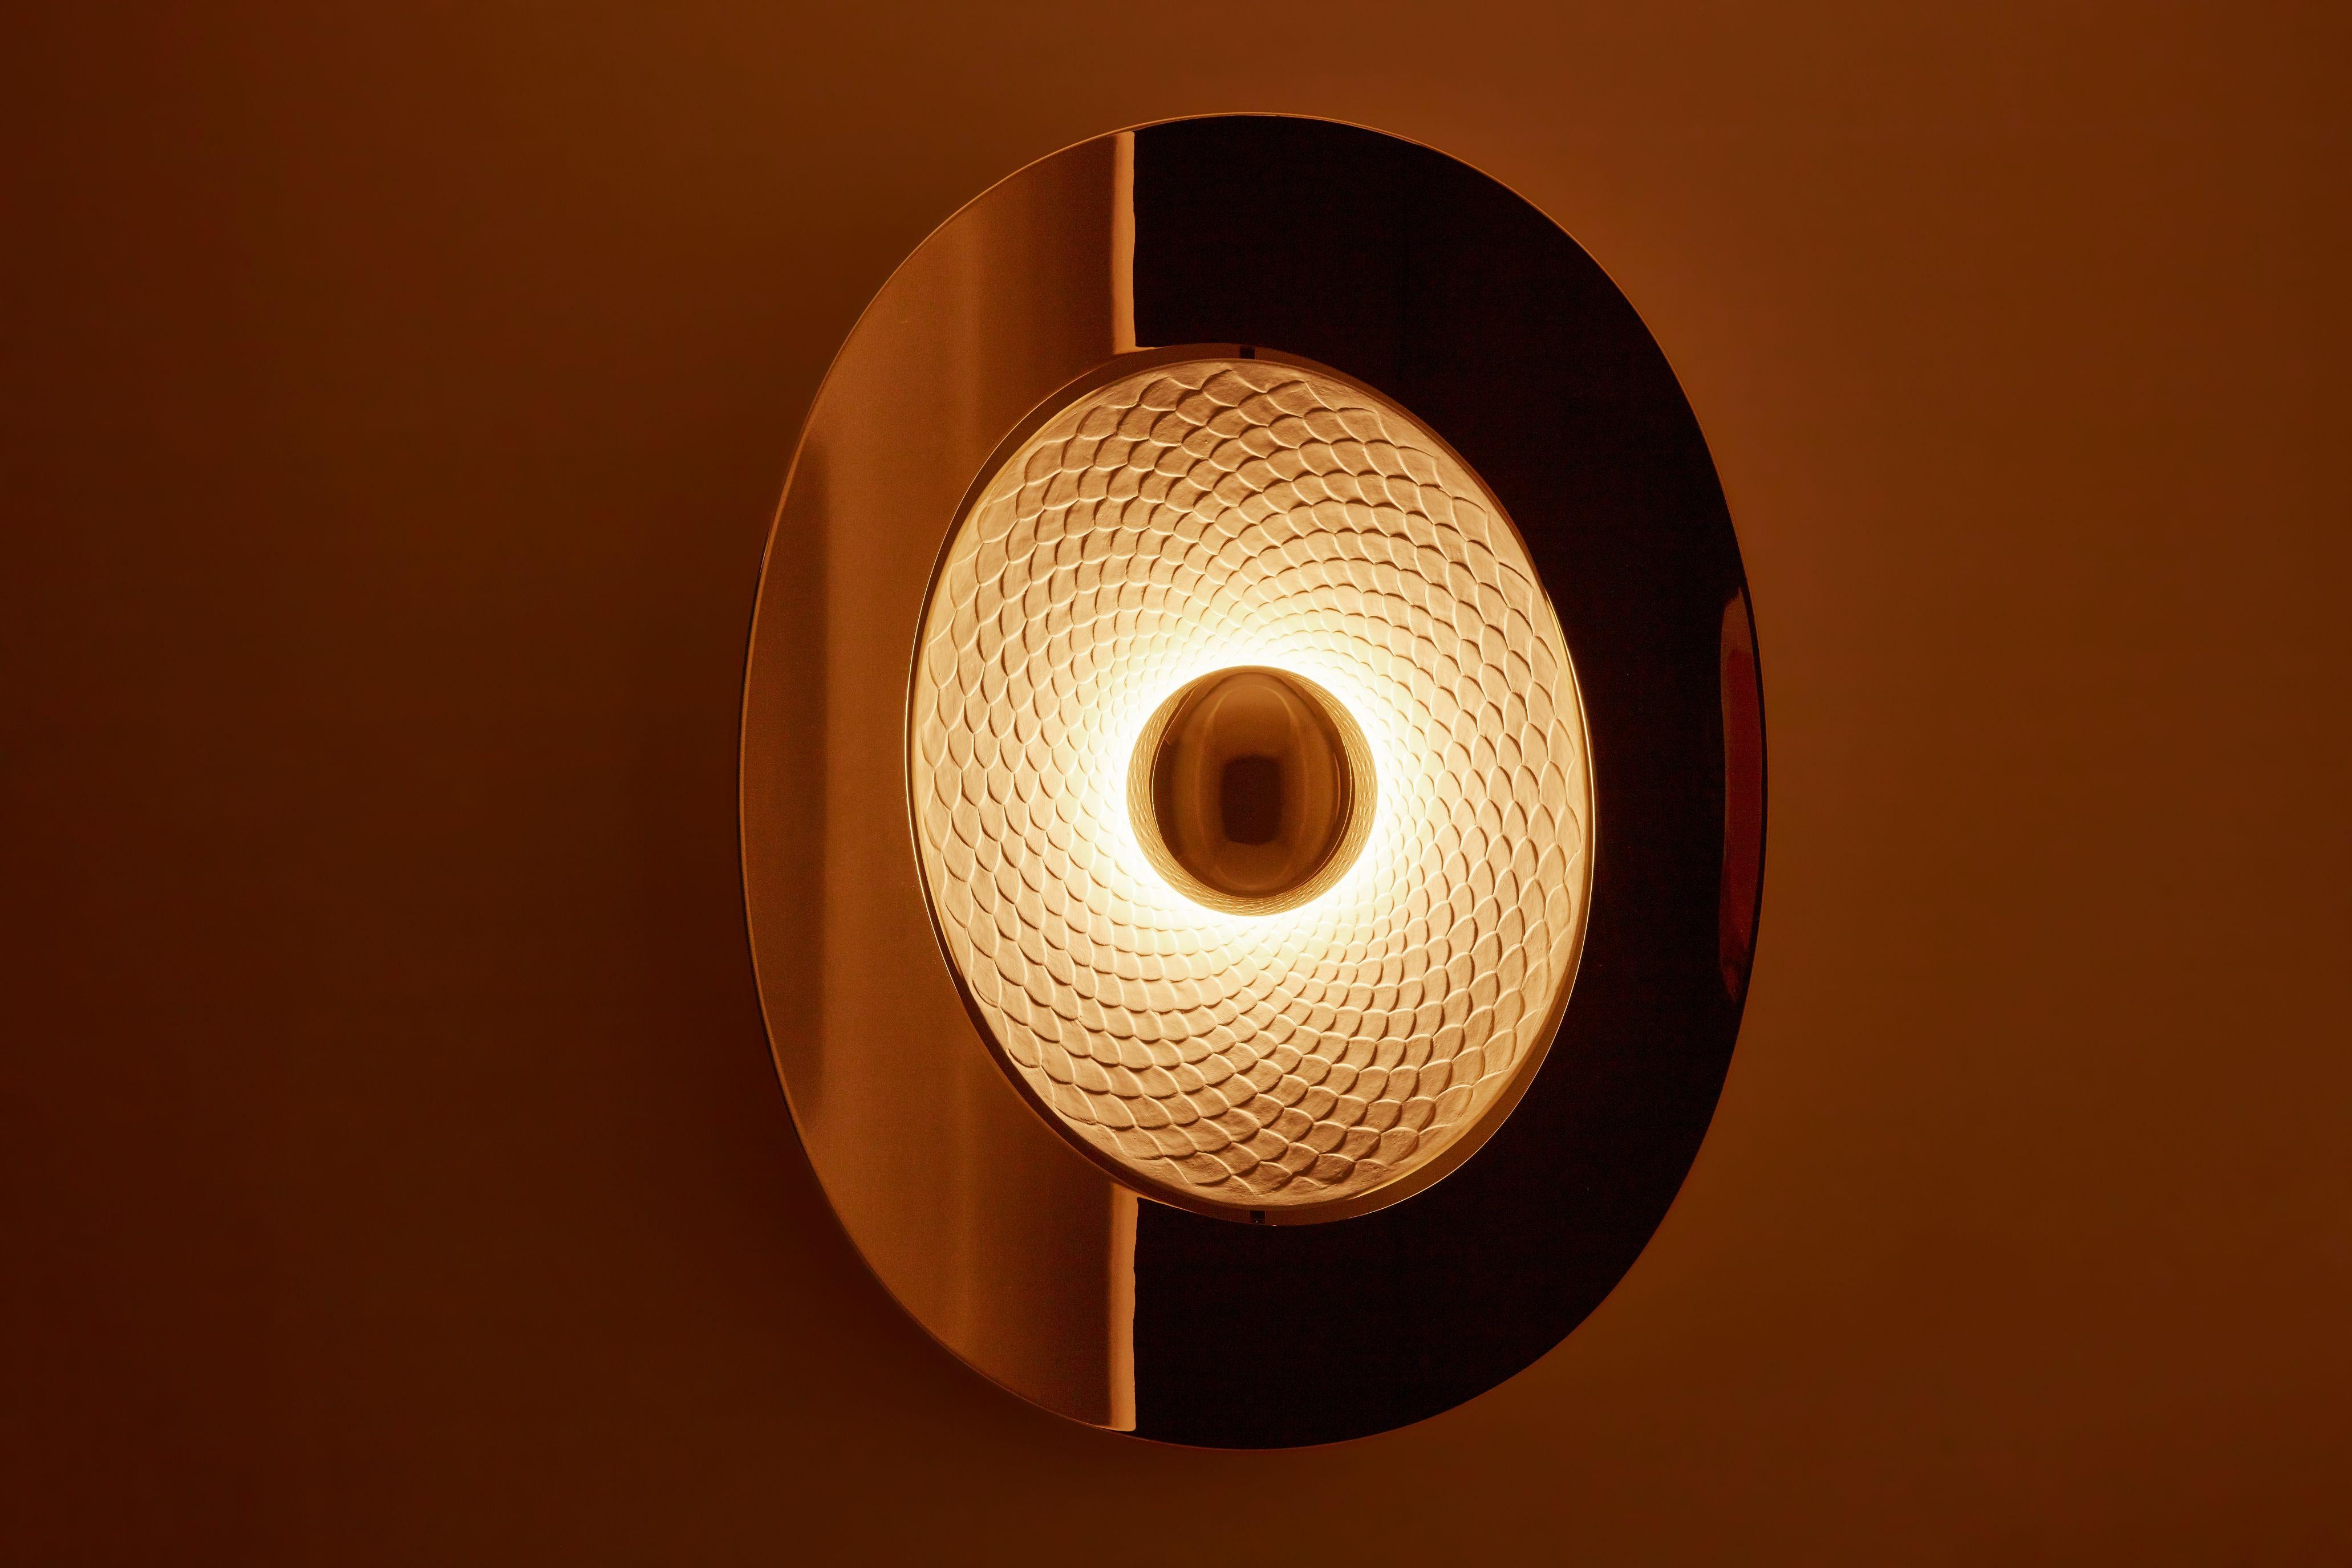 Ryu wall lamp by Mydriaz.
Dimensions: W 53.4 x H 65.3 x D 8 cm
Materials: Brass, plaster
Finishes: Golden-plated, polished brass, white nickel finish, on polished brass, black nickel finish on polished brass

All our lamps can be wired according to